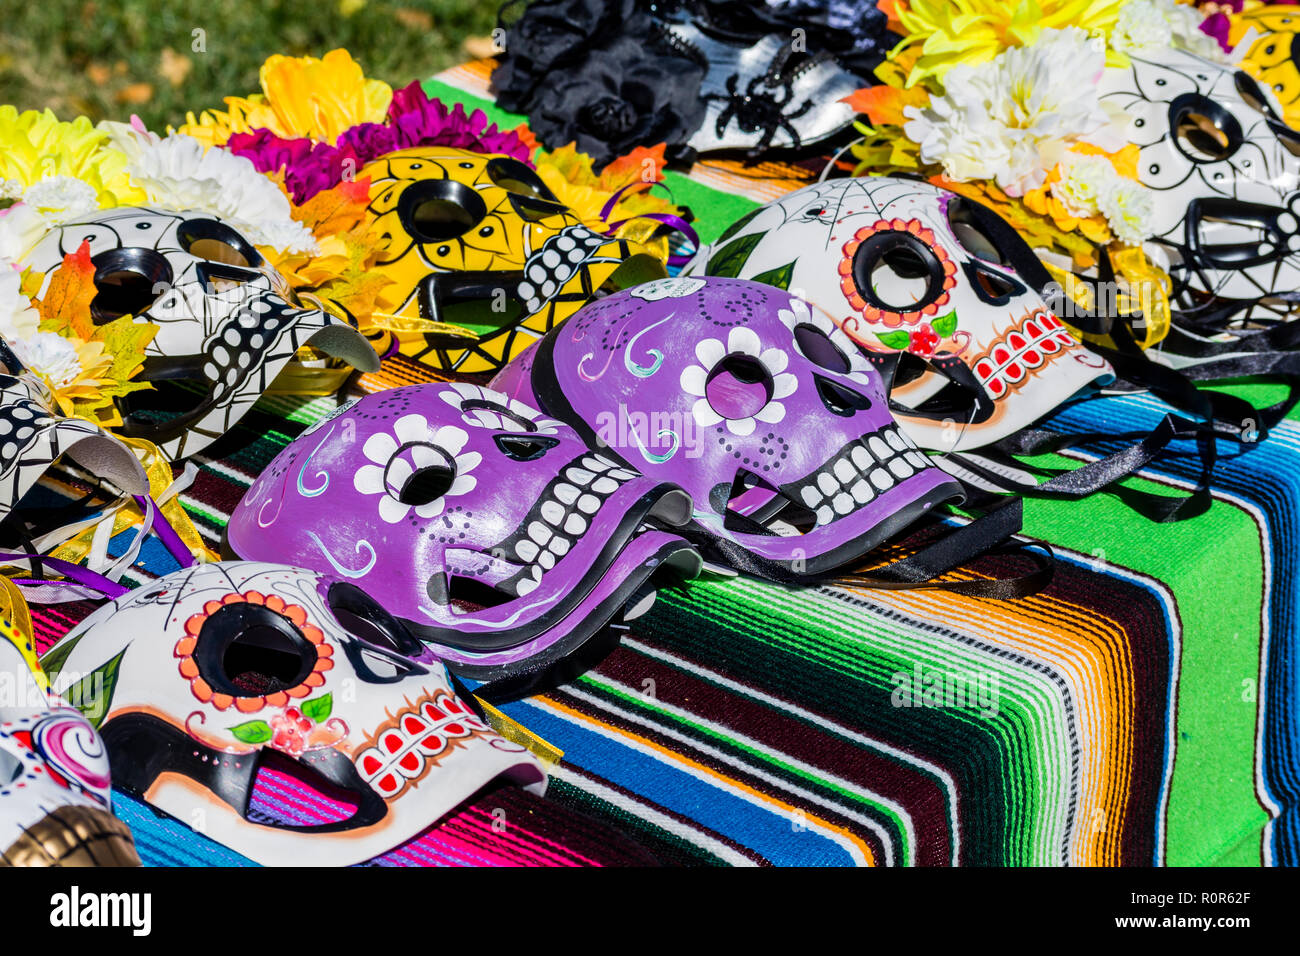 Day of the Dead, Dia de los Muertos, colorful skull masks for sale during celebration in New Mexico USA. Stock Photo